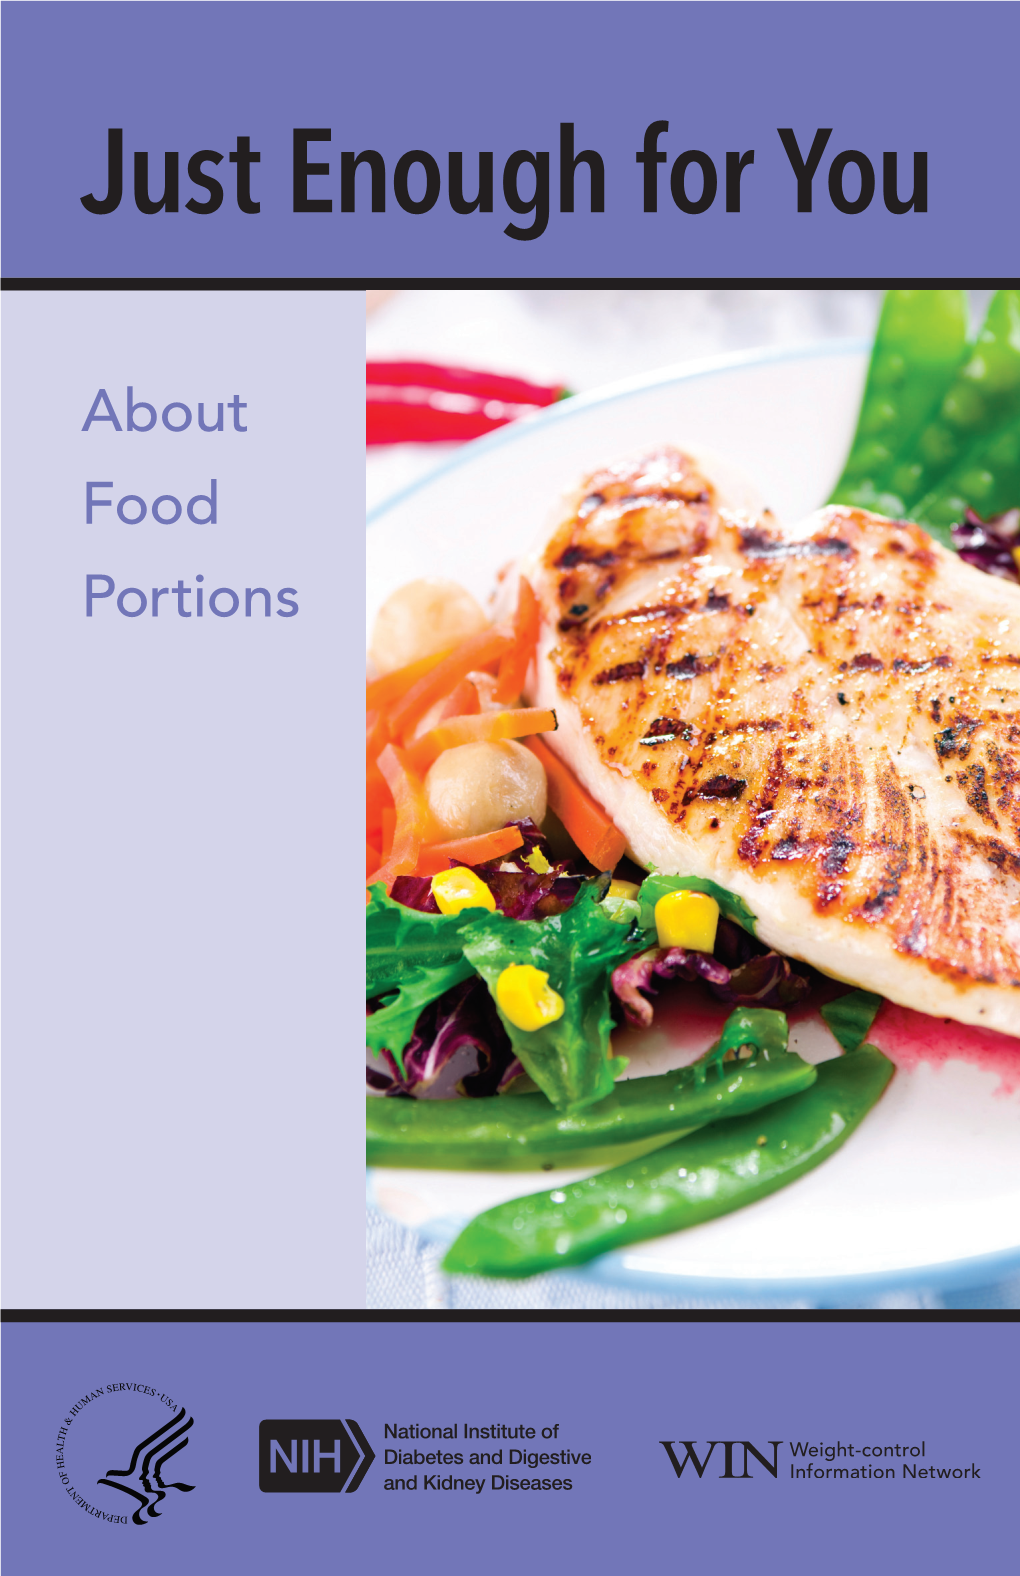 About Food Portions Contents